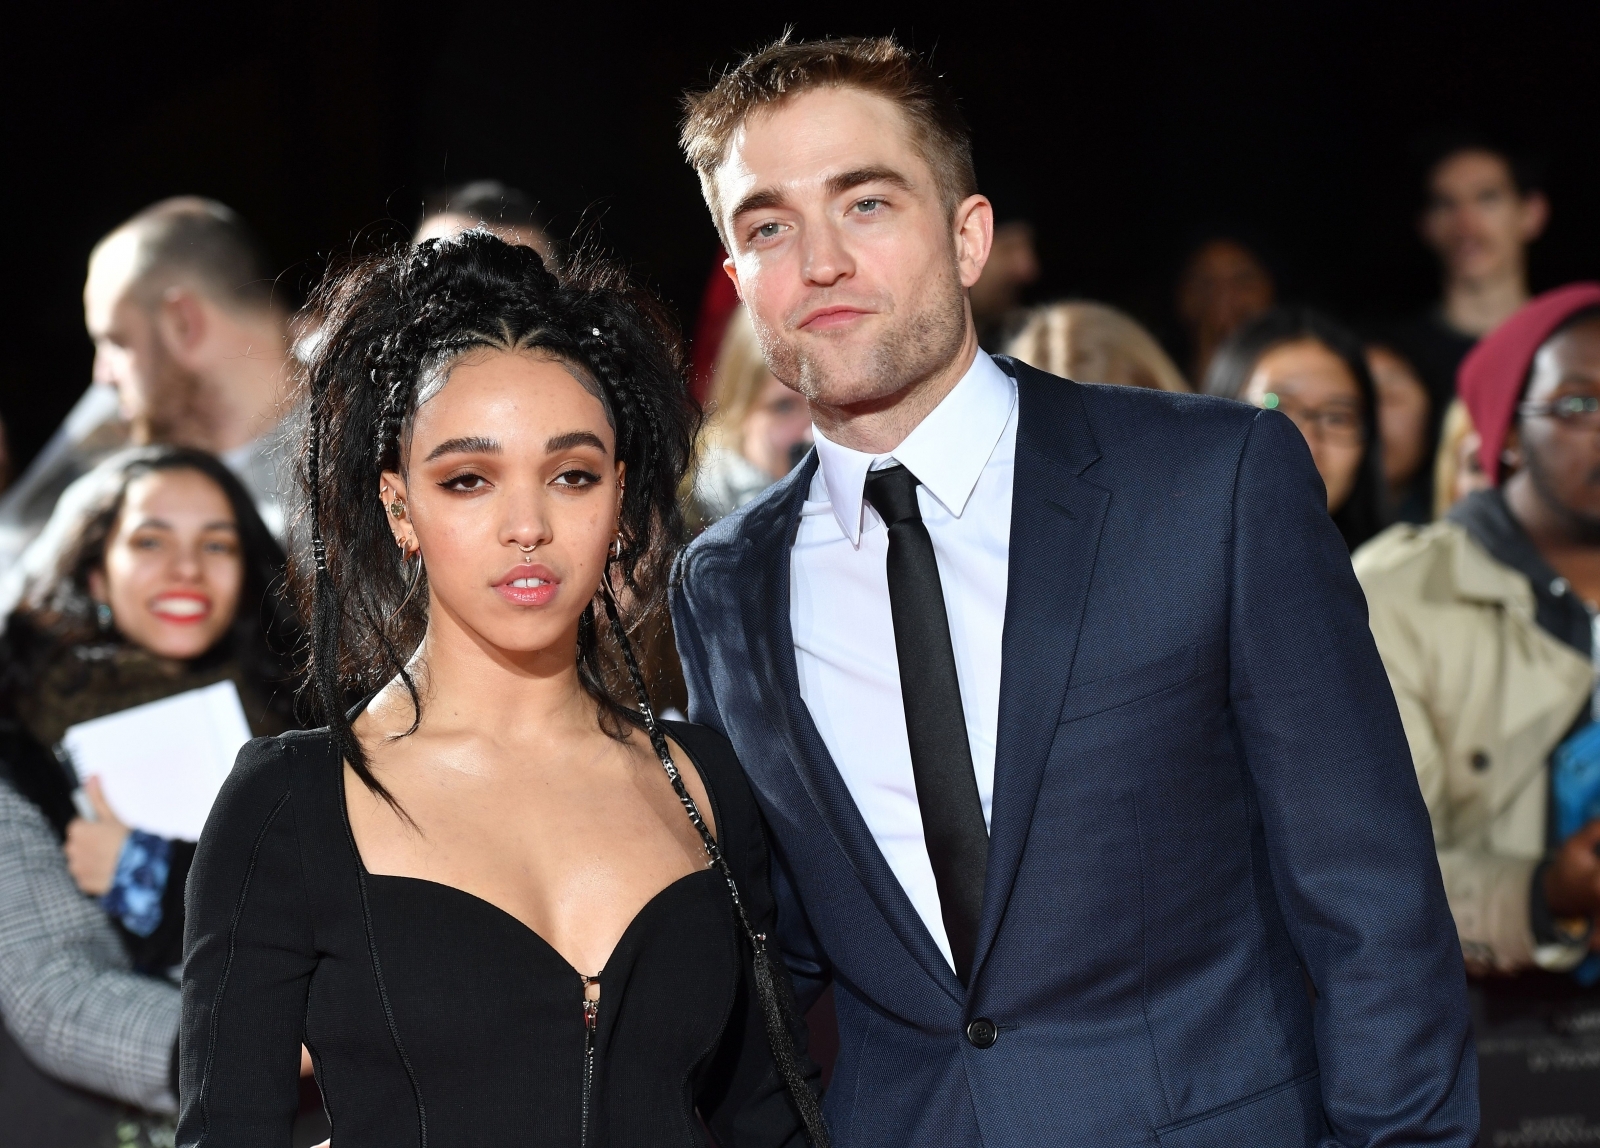 Who is Robert Pattinson’s wife?